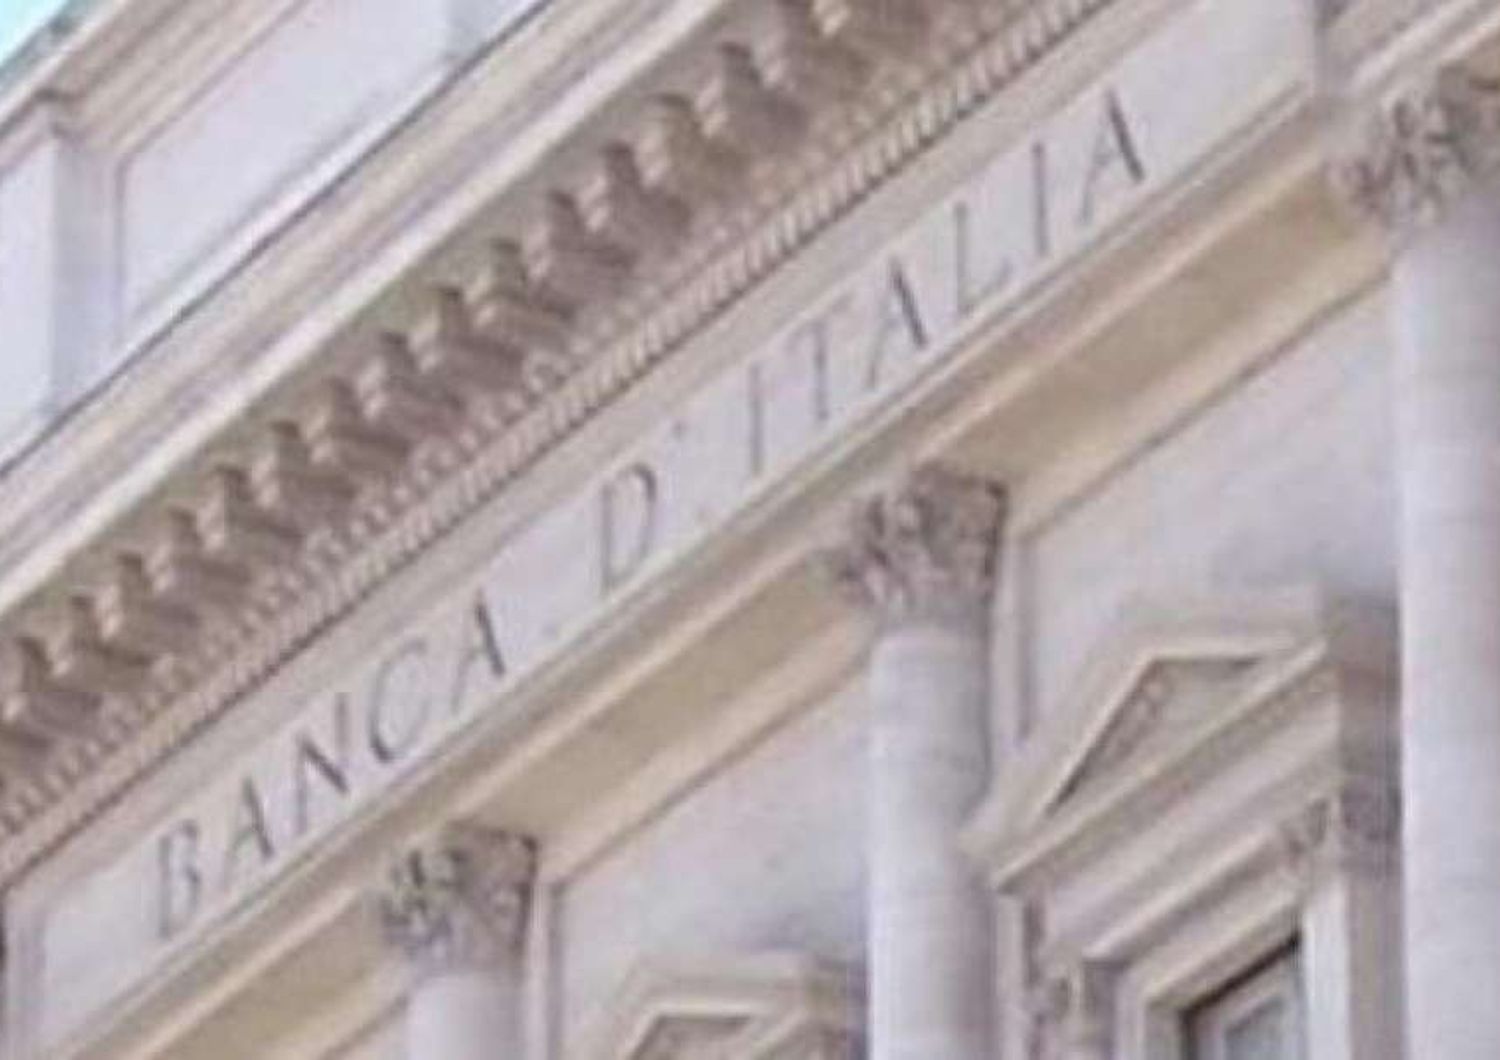 Wealth of Italian households falls, says Bank of Italy